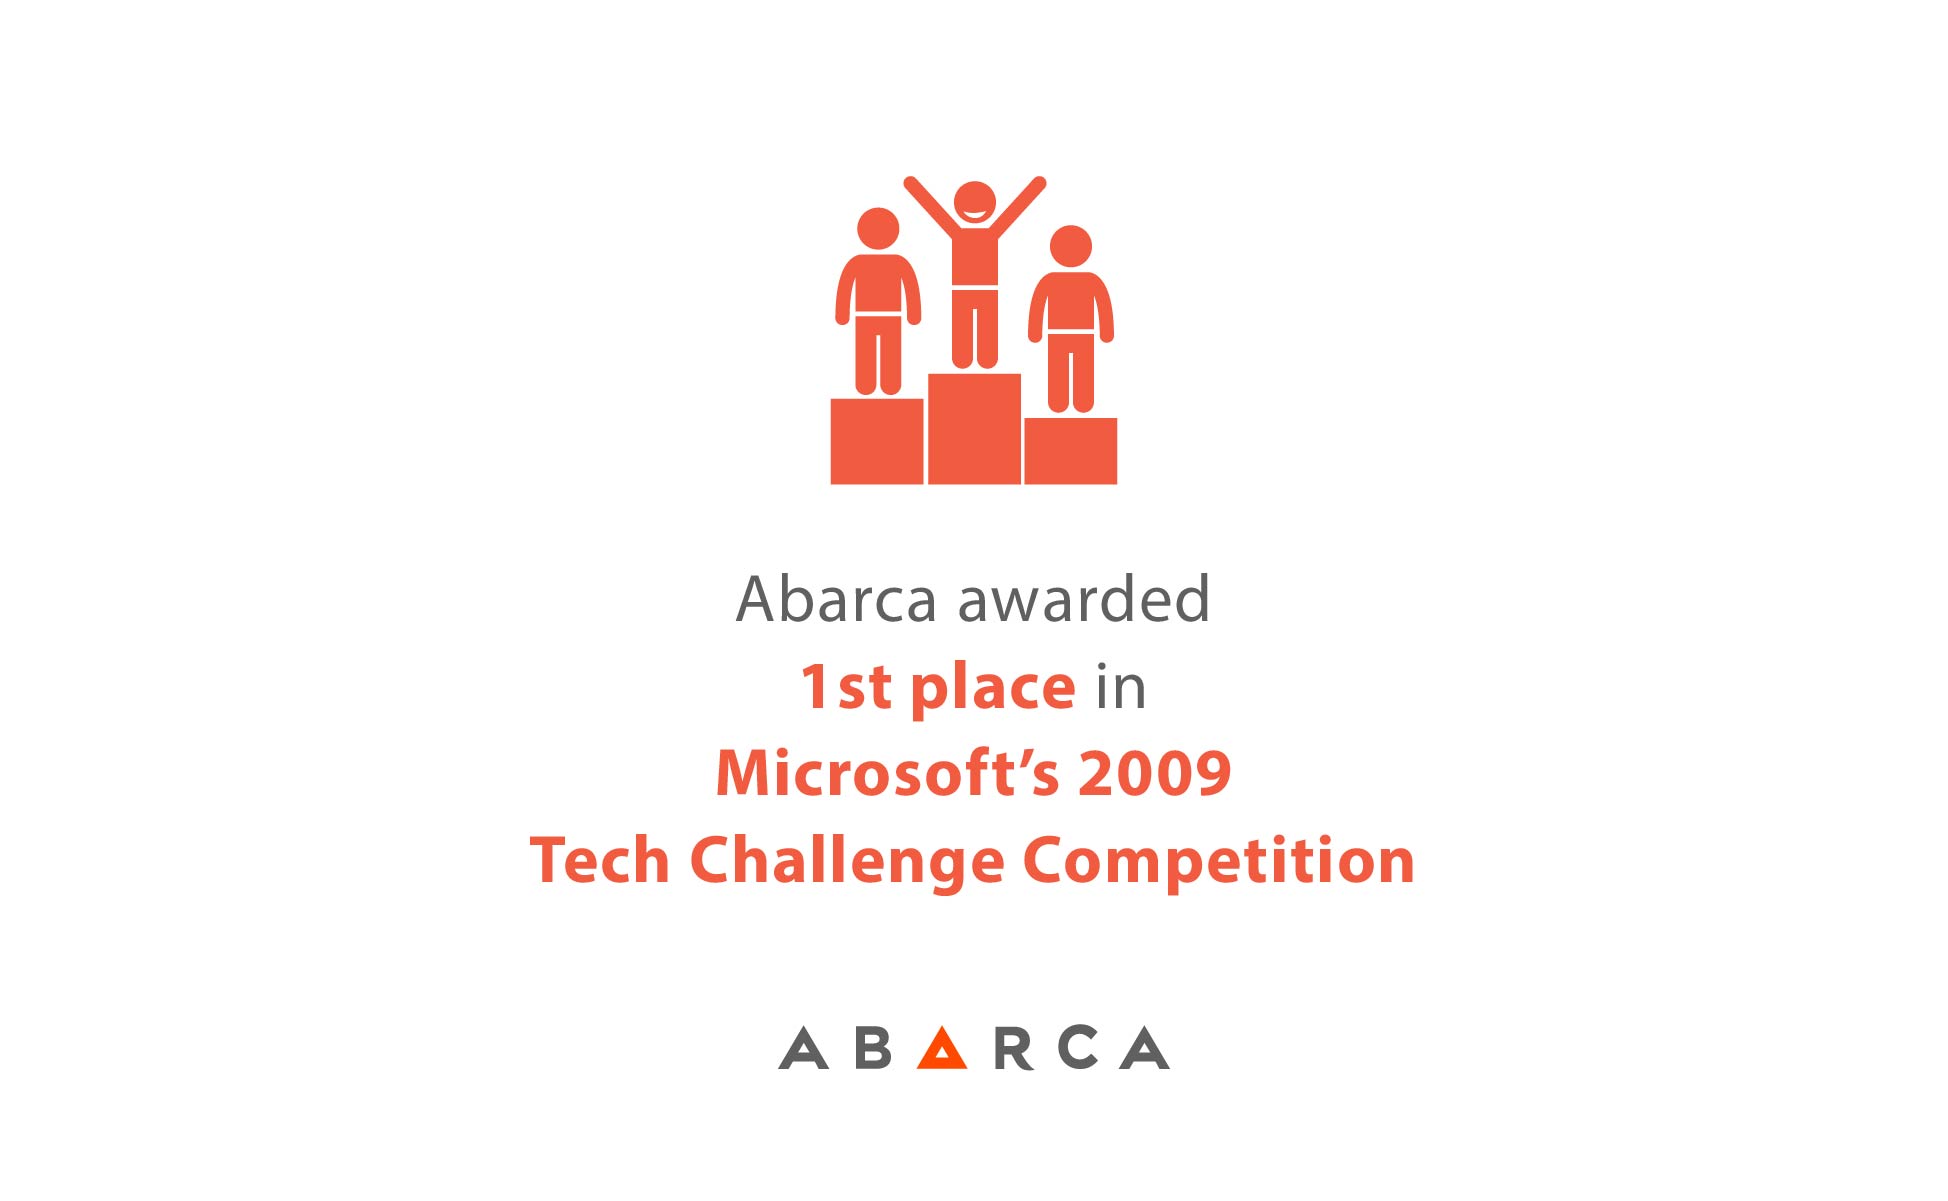 Abarca awarded 1st place in Microsoft’s 2009 Tech Challenge Competition